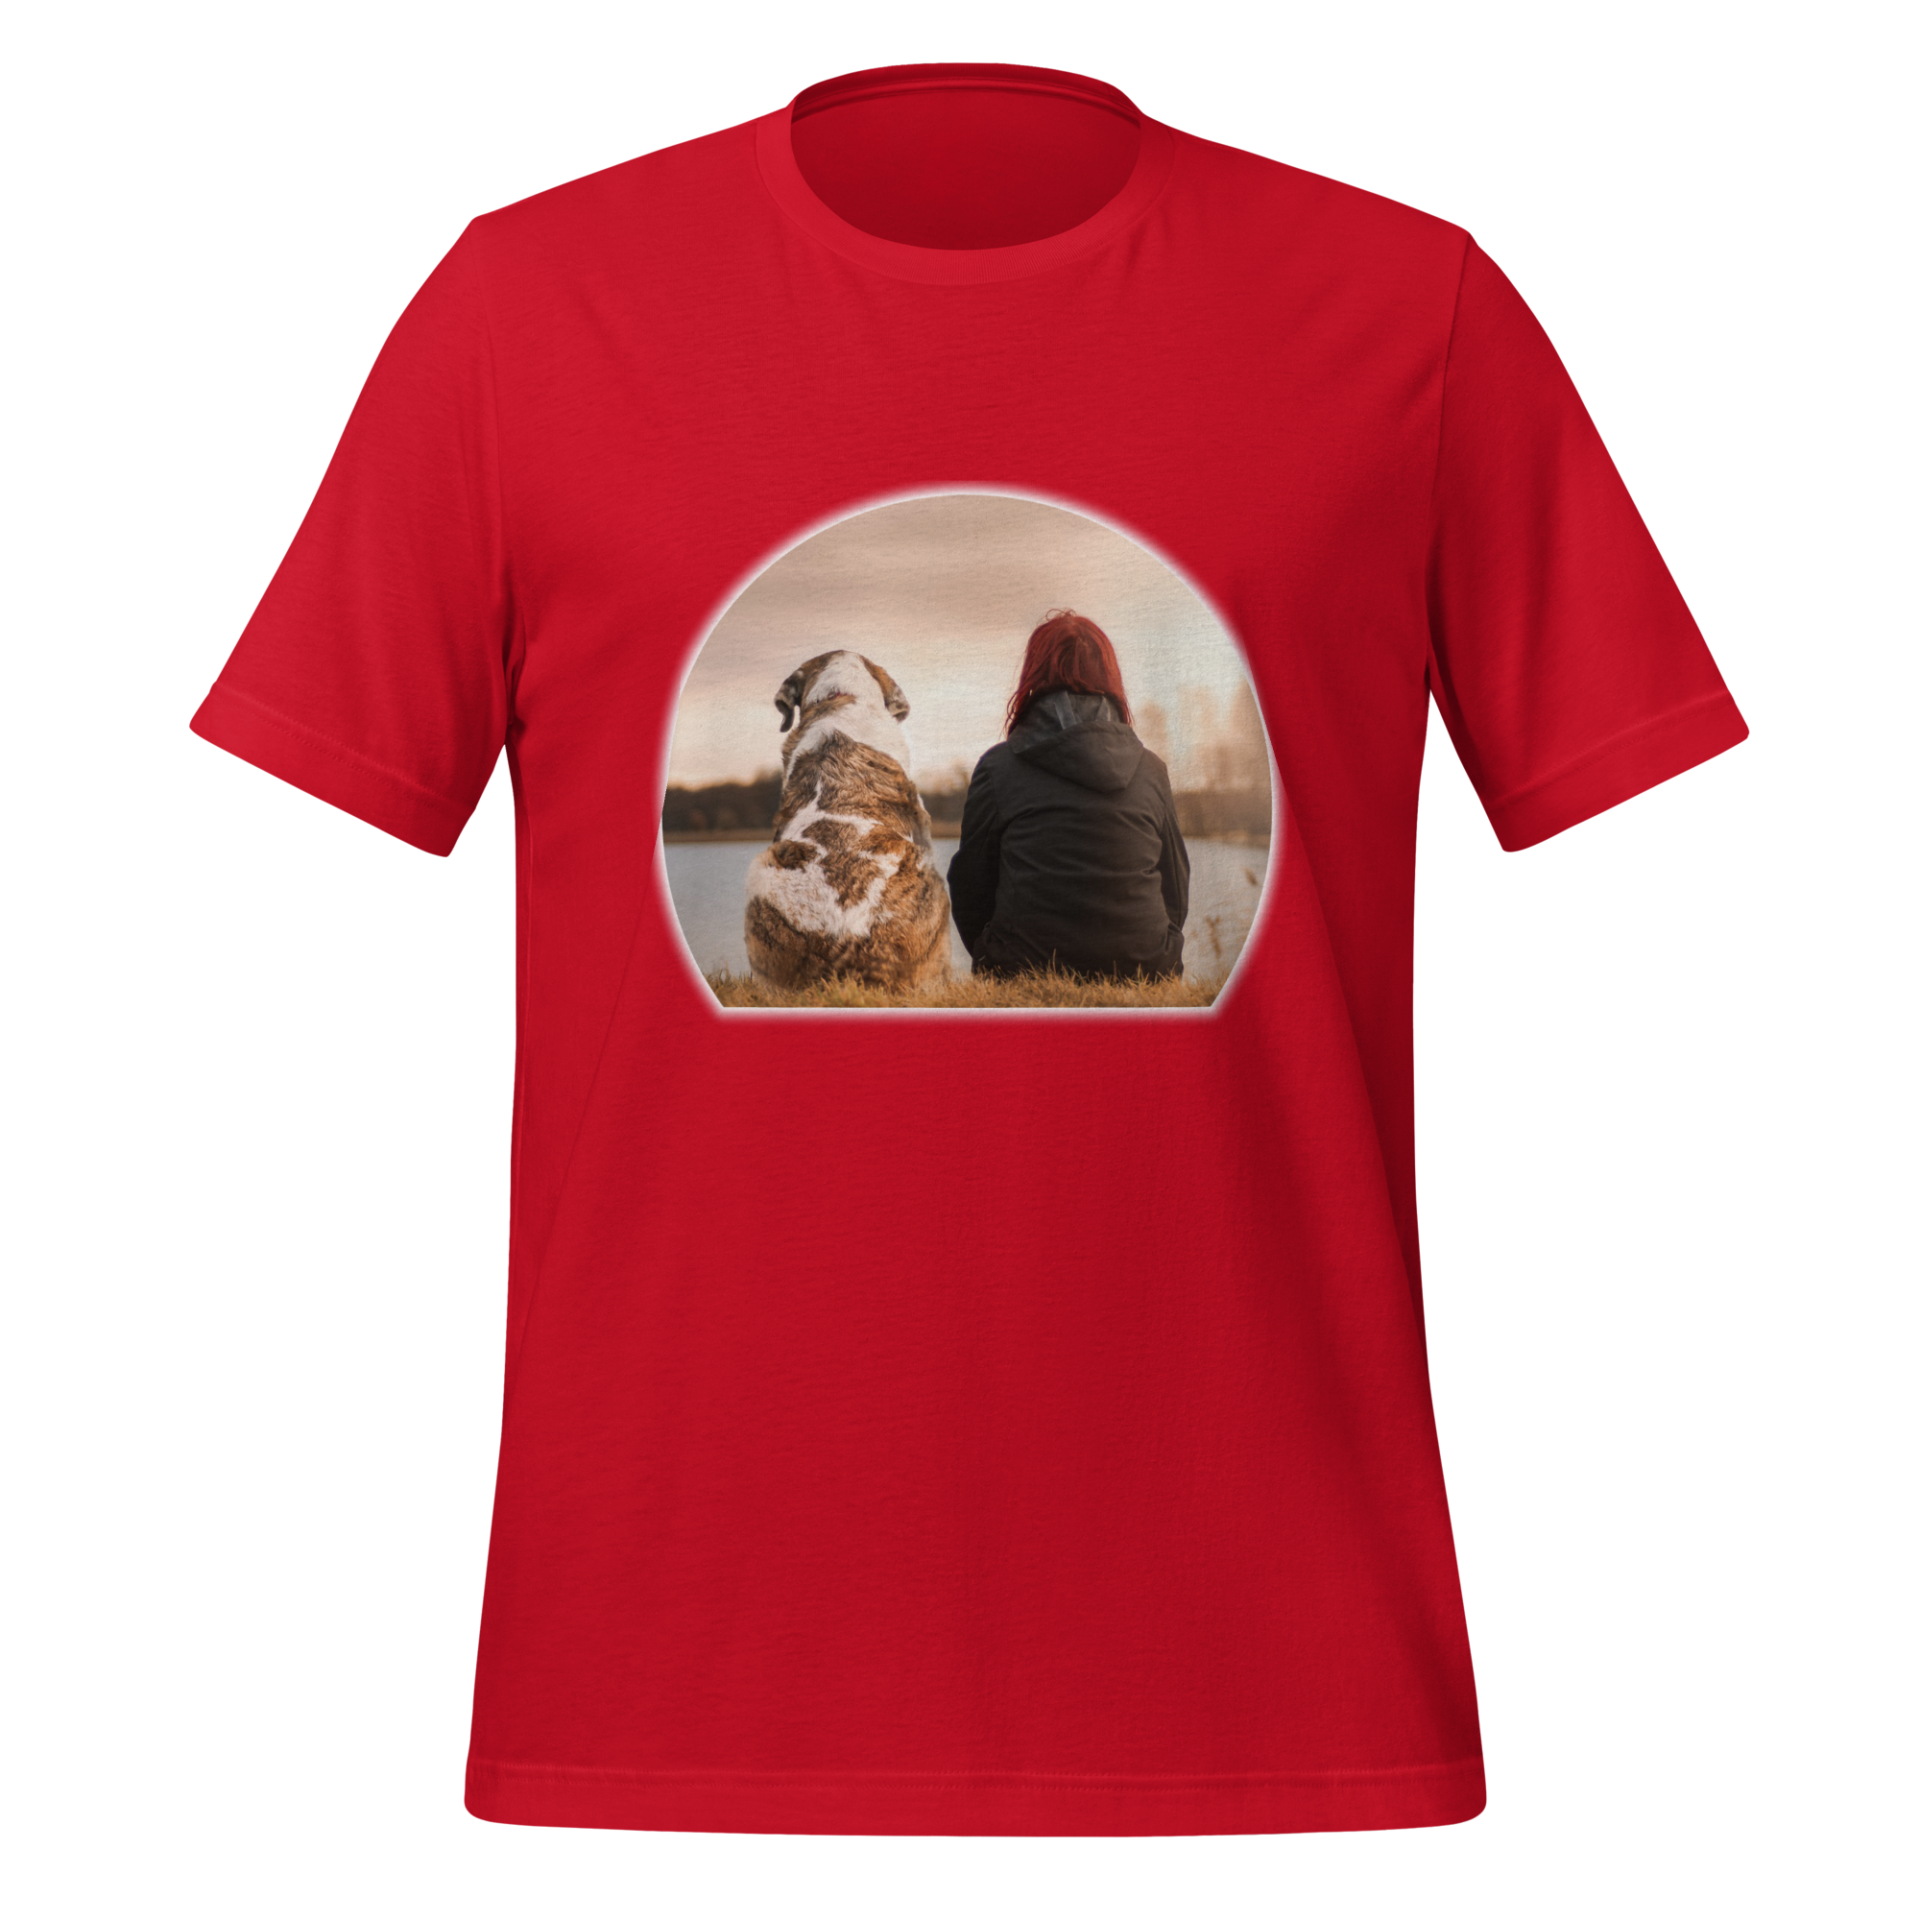 Print your favorite photo on a T-shirt. It can be a treat for yourself, for your loved one, or your furred friend.